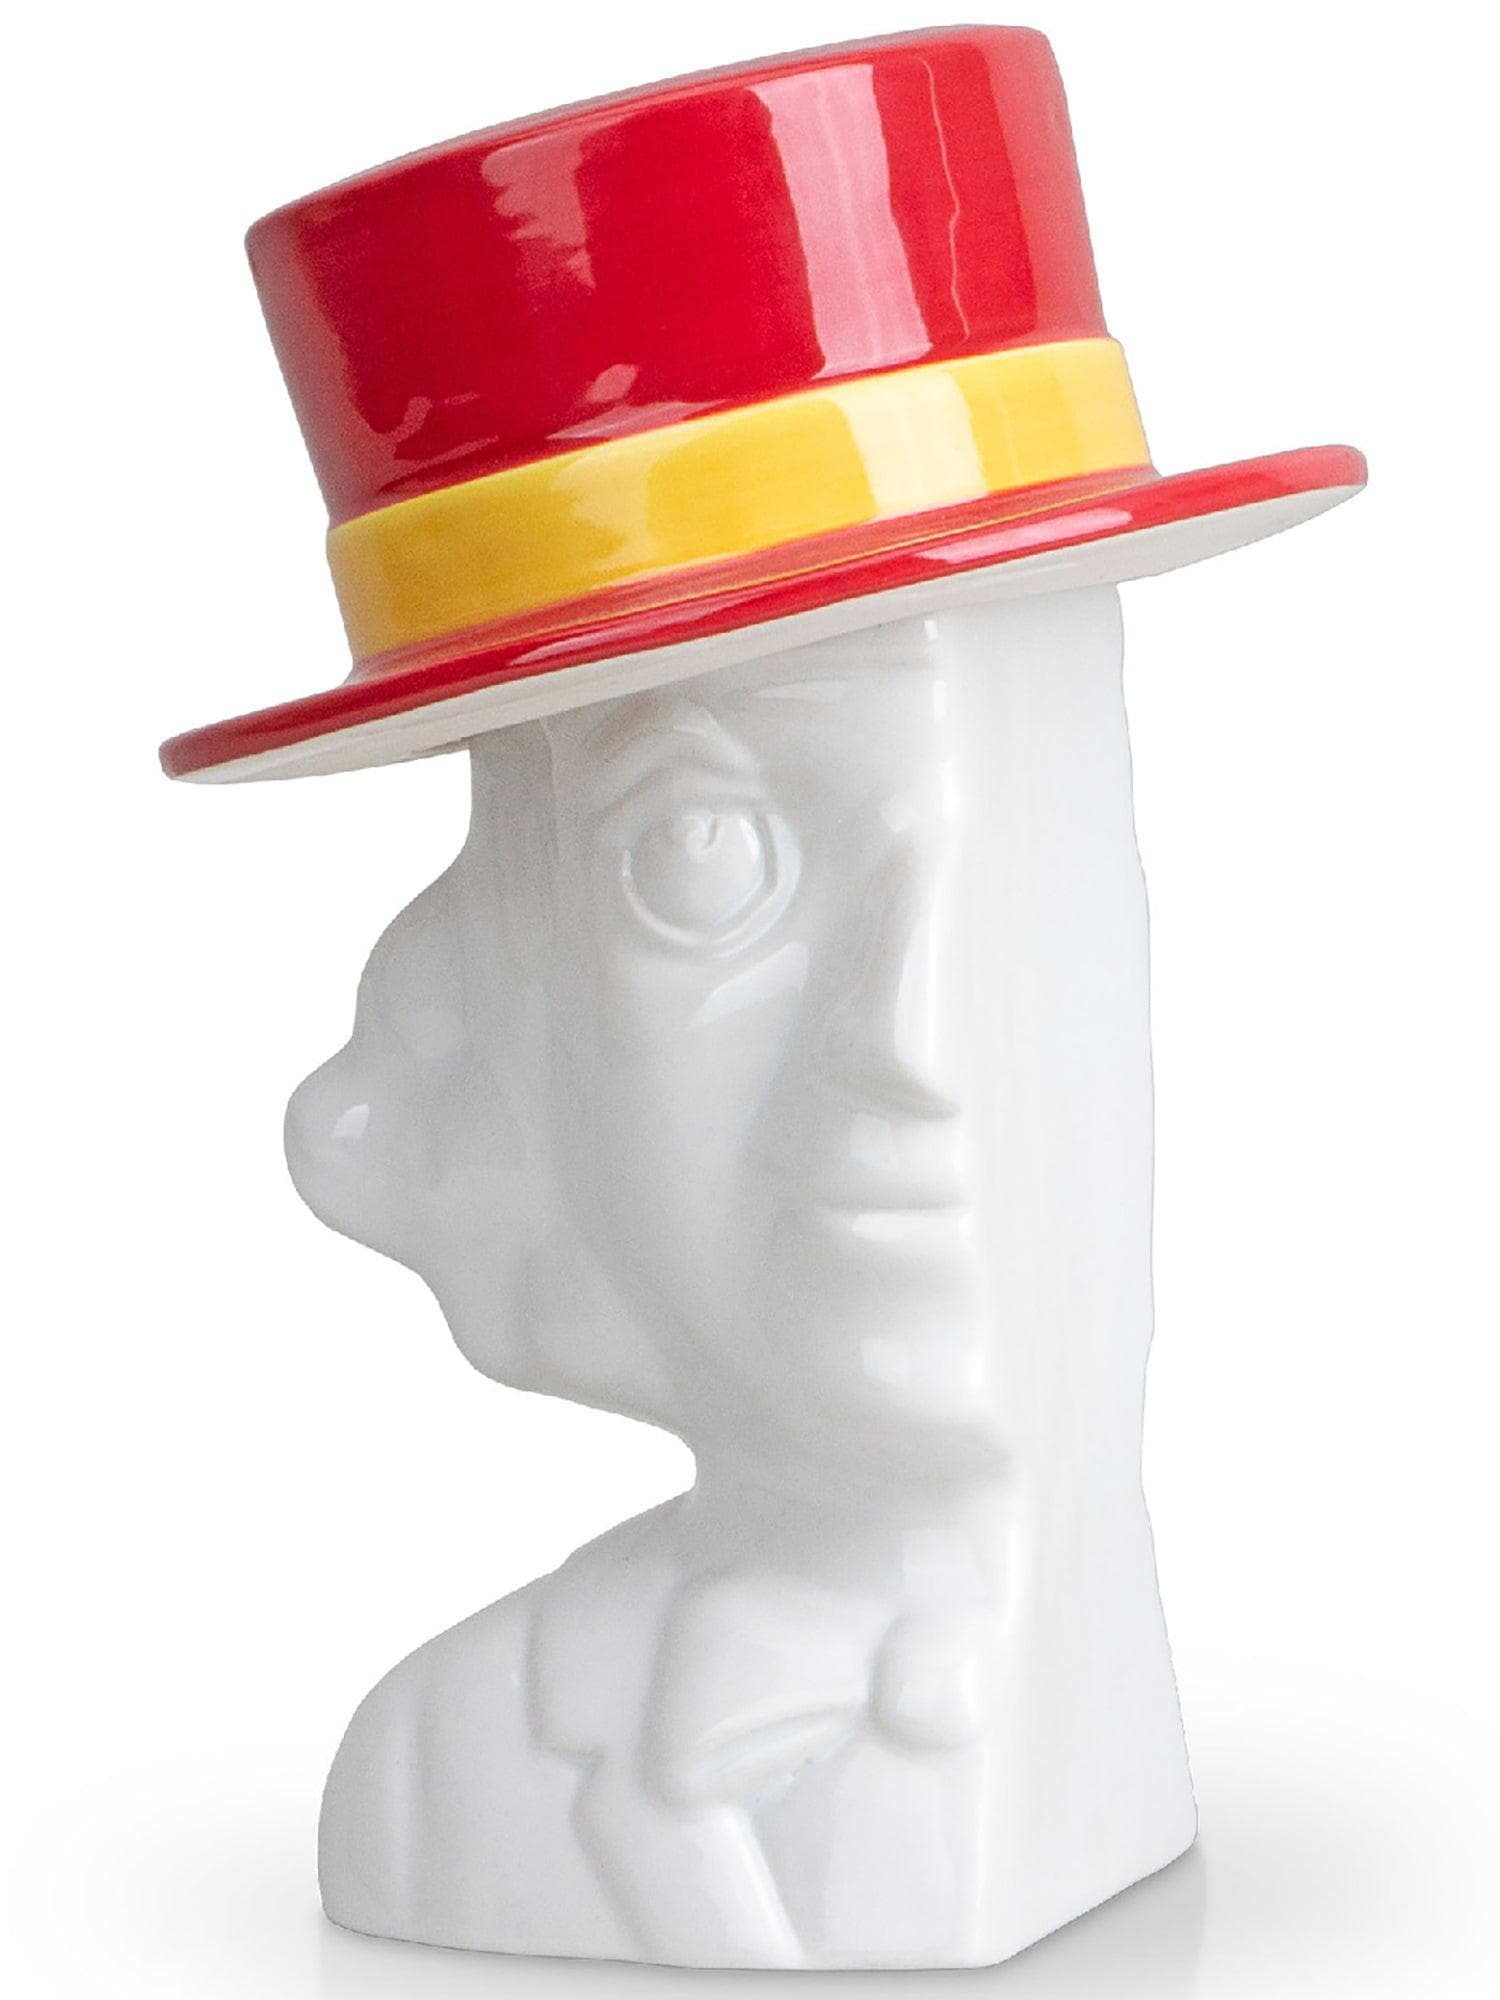 Willy Wonka & the Chocolate Factory Half Bust Cookie Jar - costumes.com